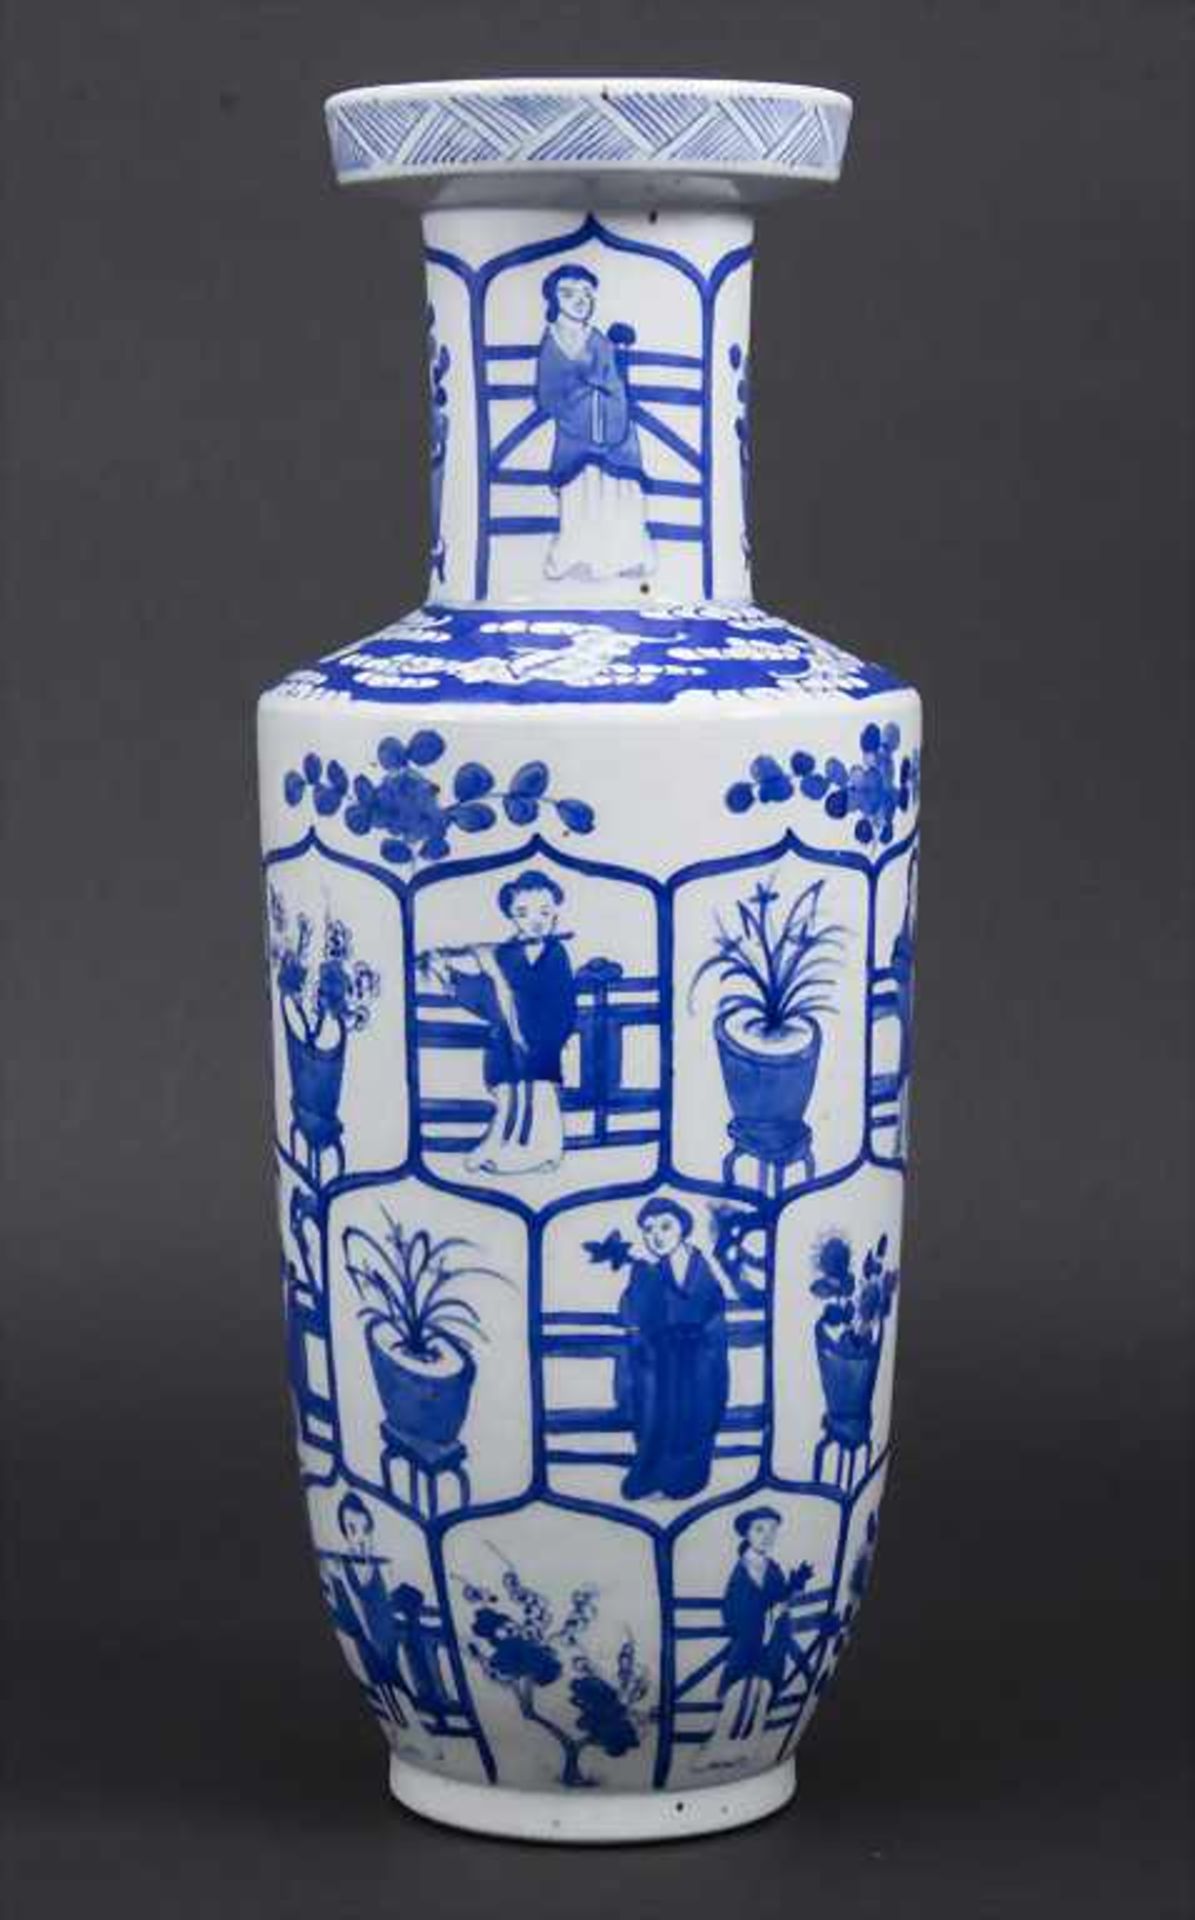 Ziervase / A decorative vase, China, Qing-Dynastie (1644-1911), wohl Kangxi-Periode (1662-1722)